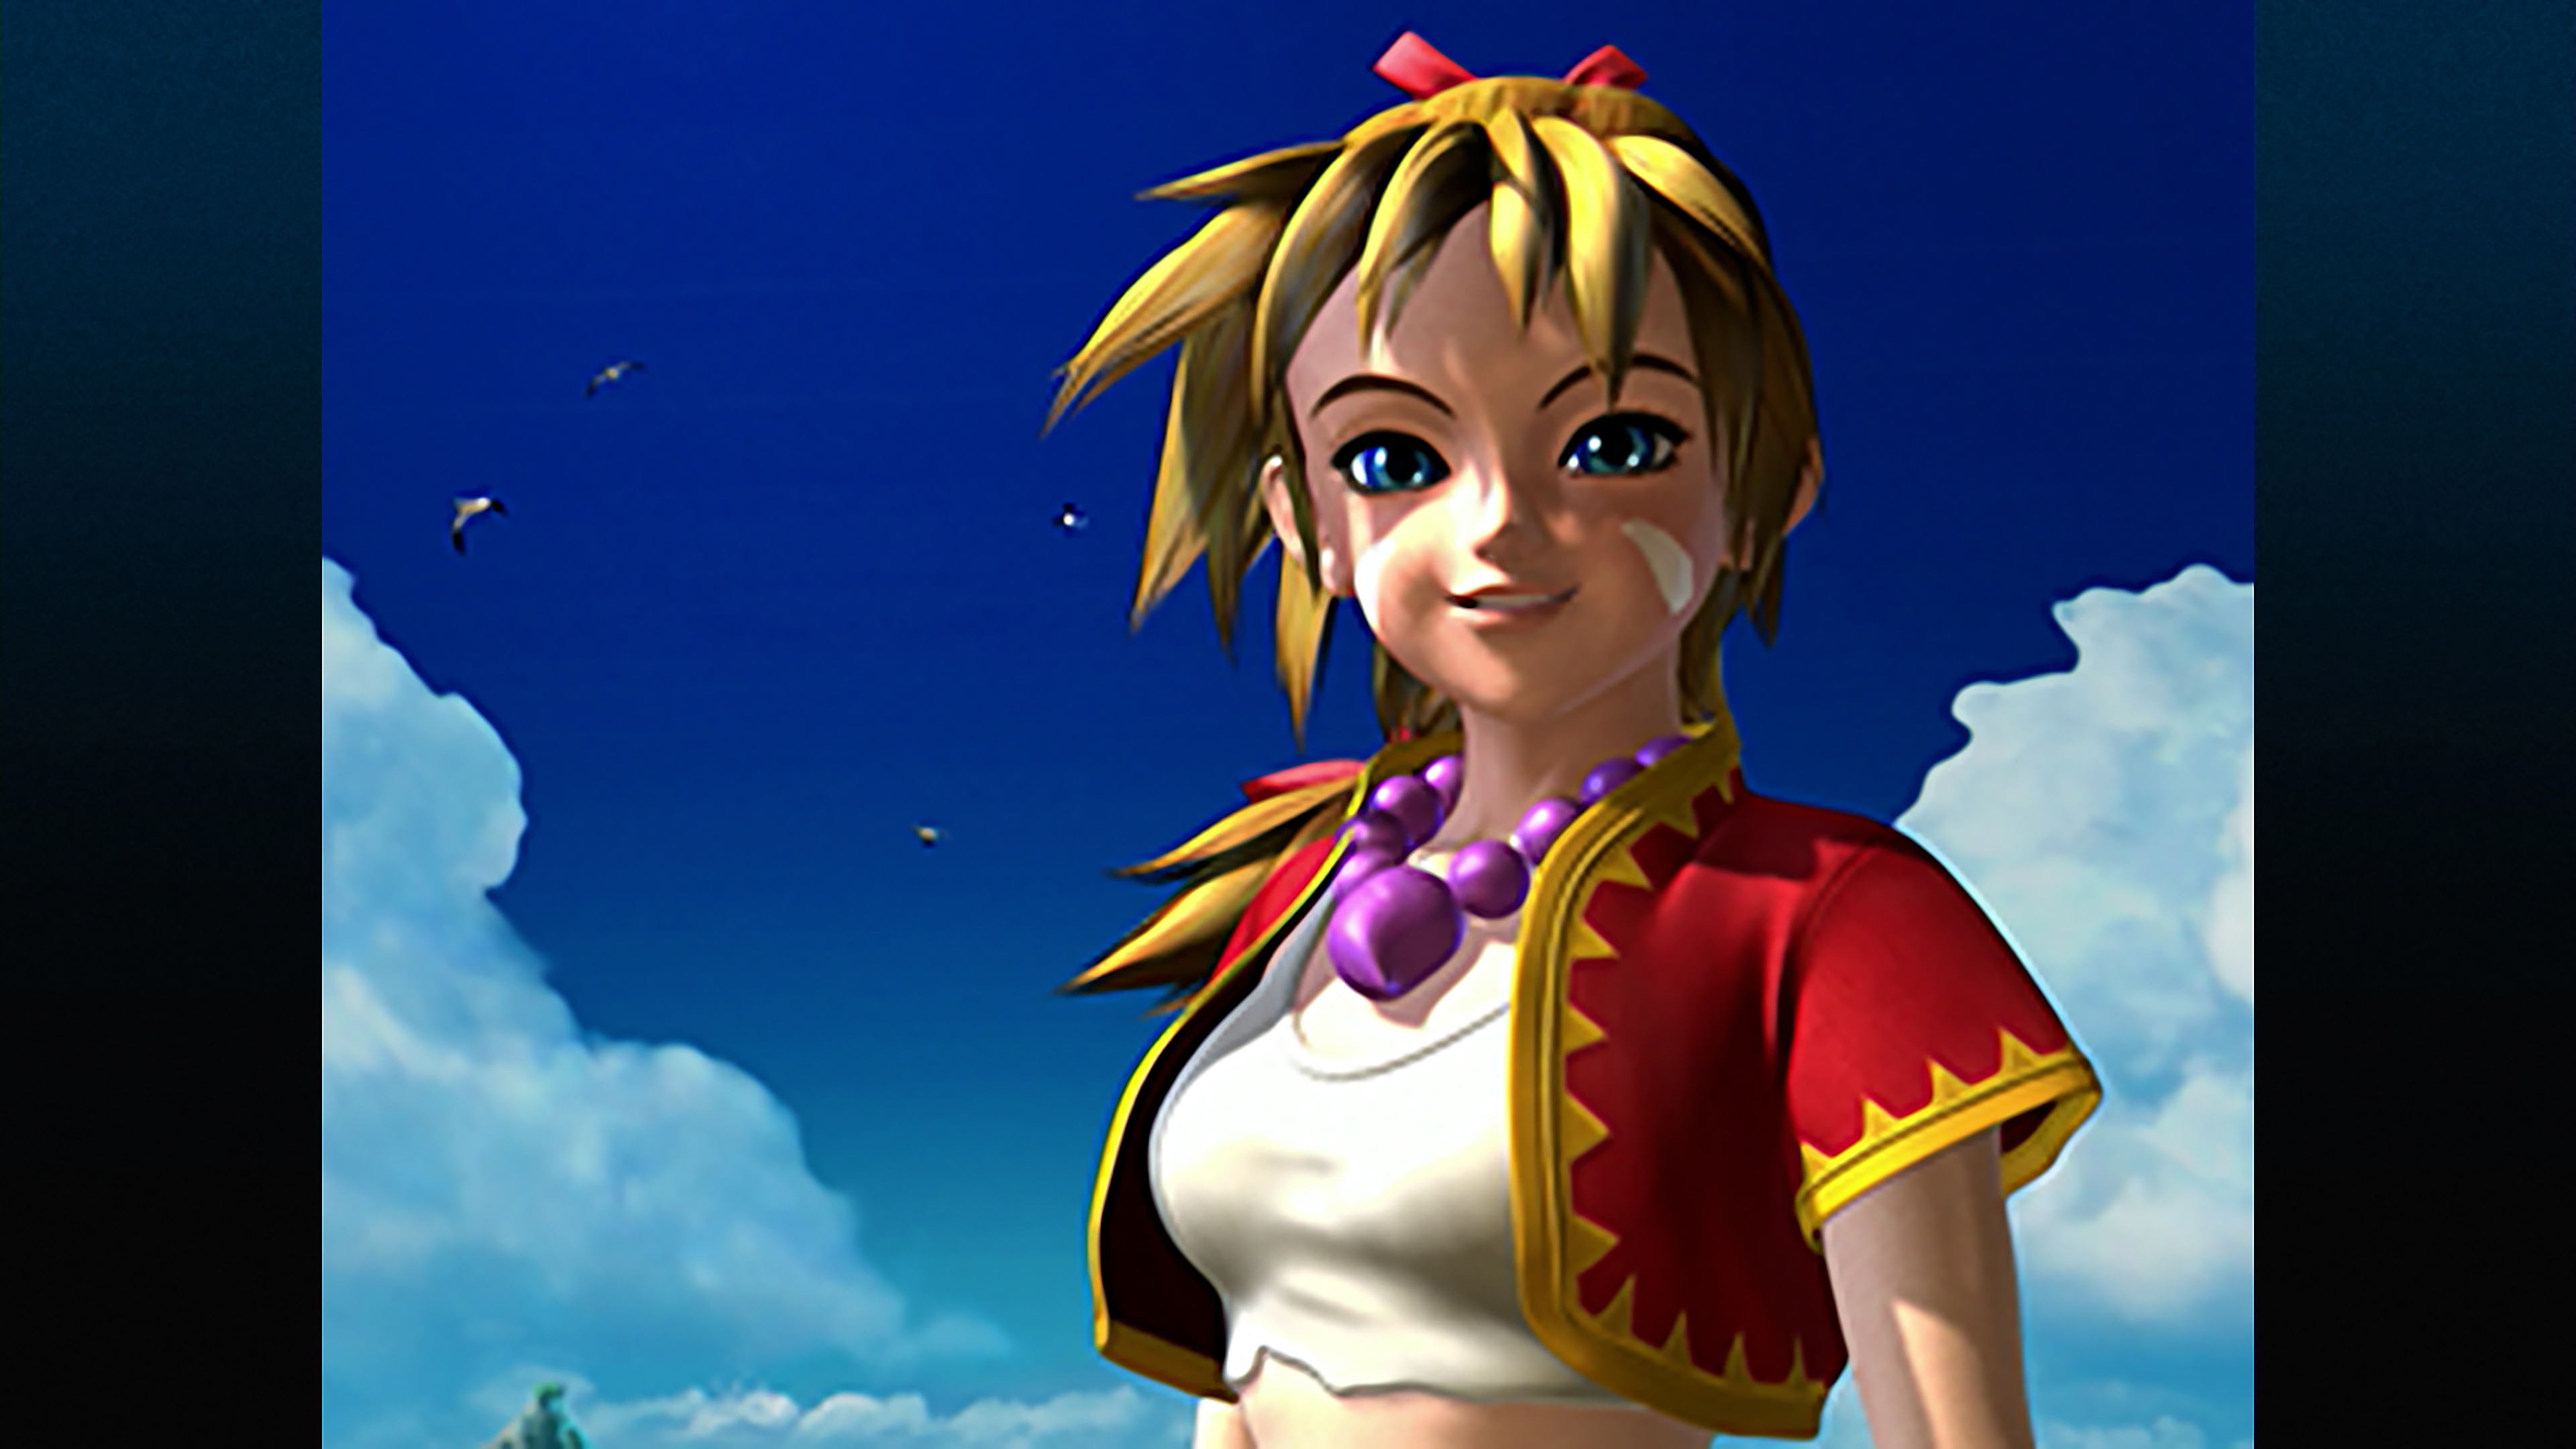 Chrono Cross: The Radical Dreamers Edition screenshot showing a character with blonde hair in a red and yellow jacket